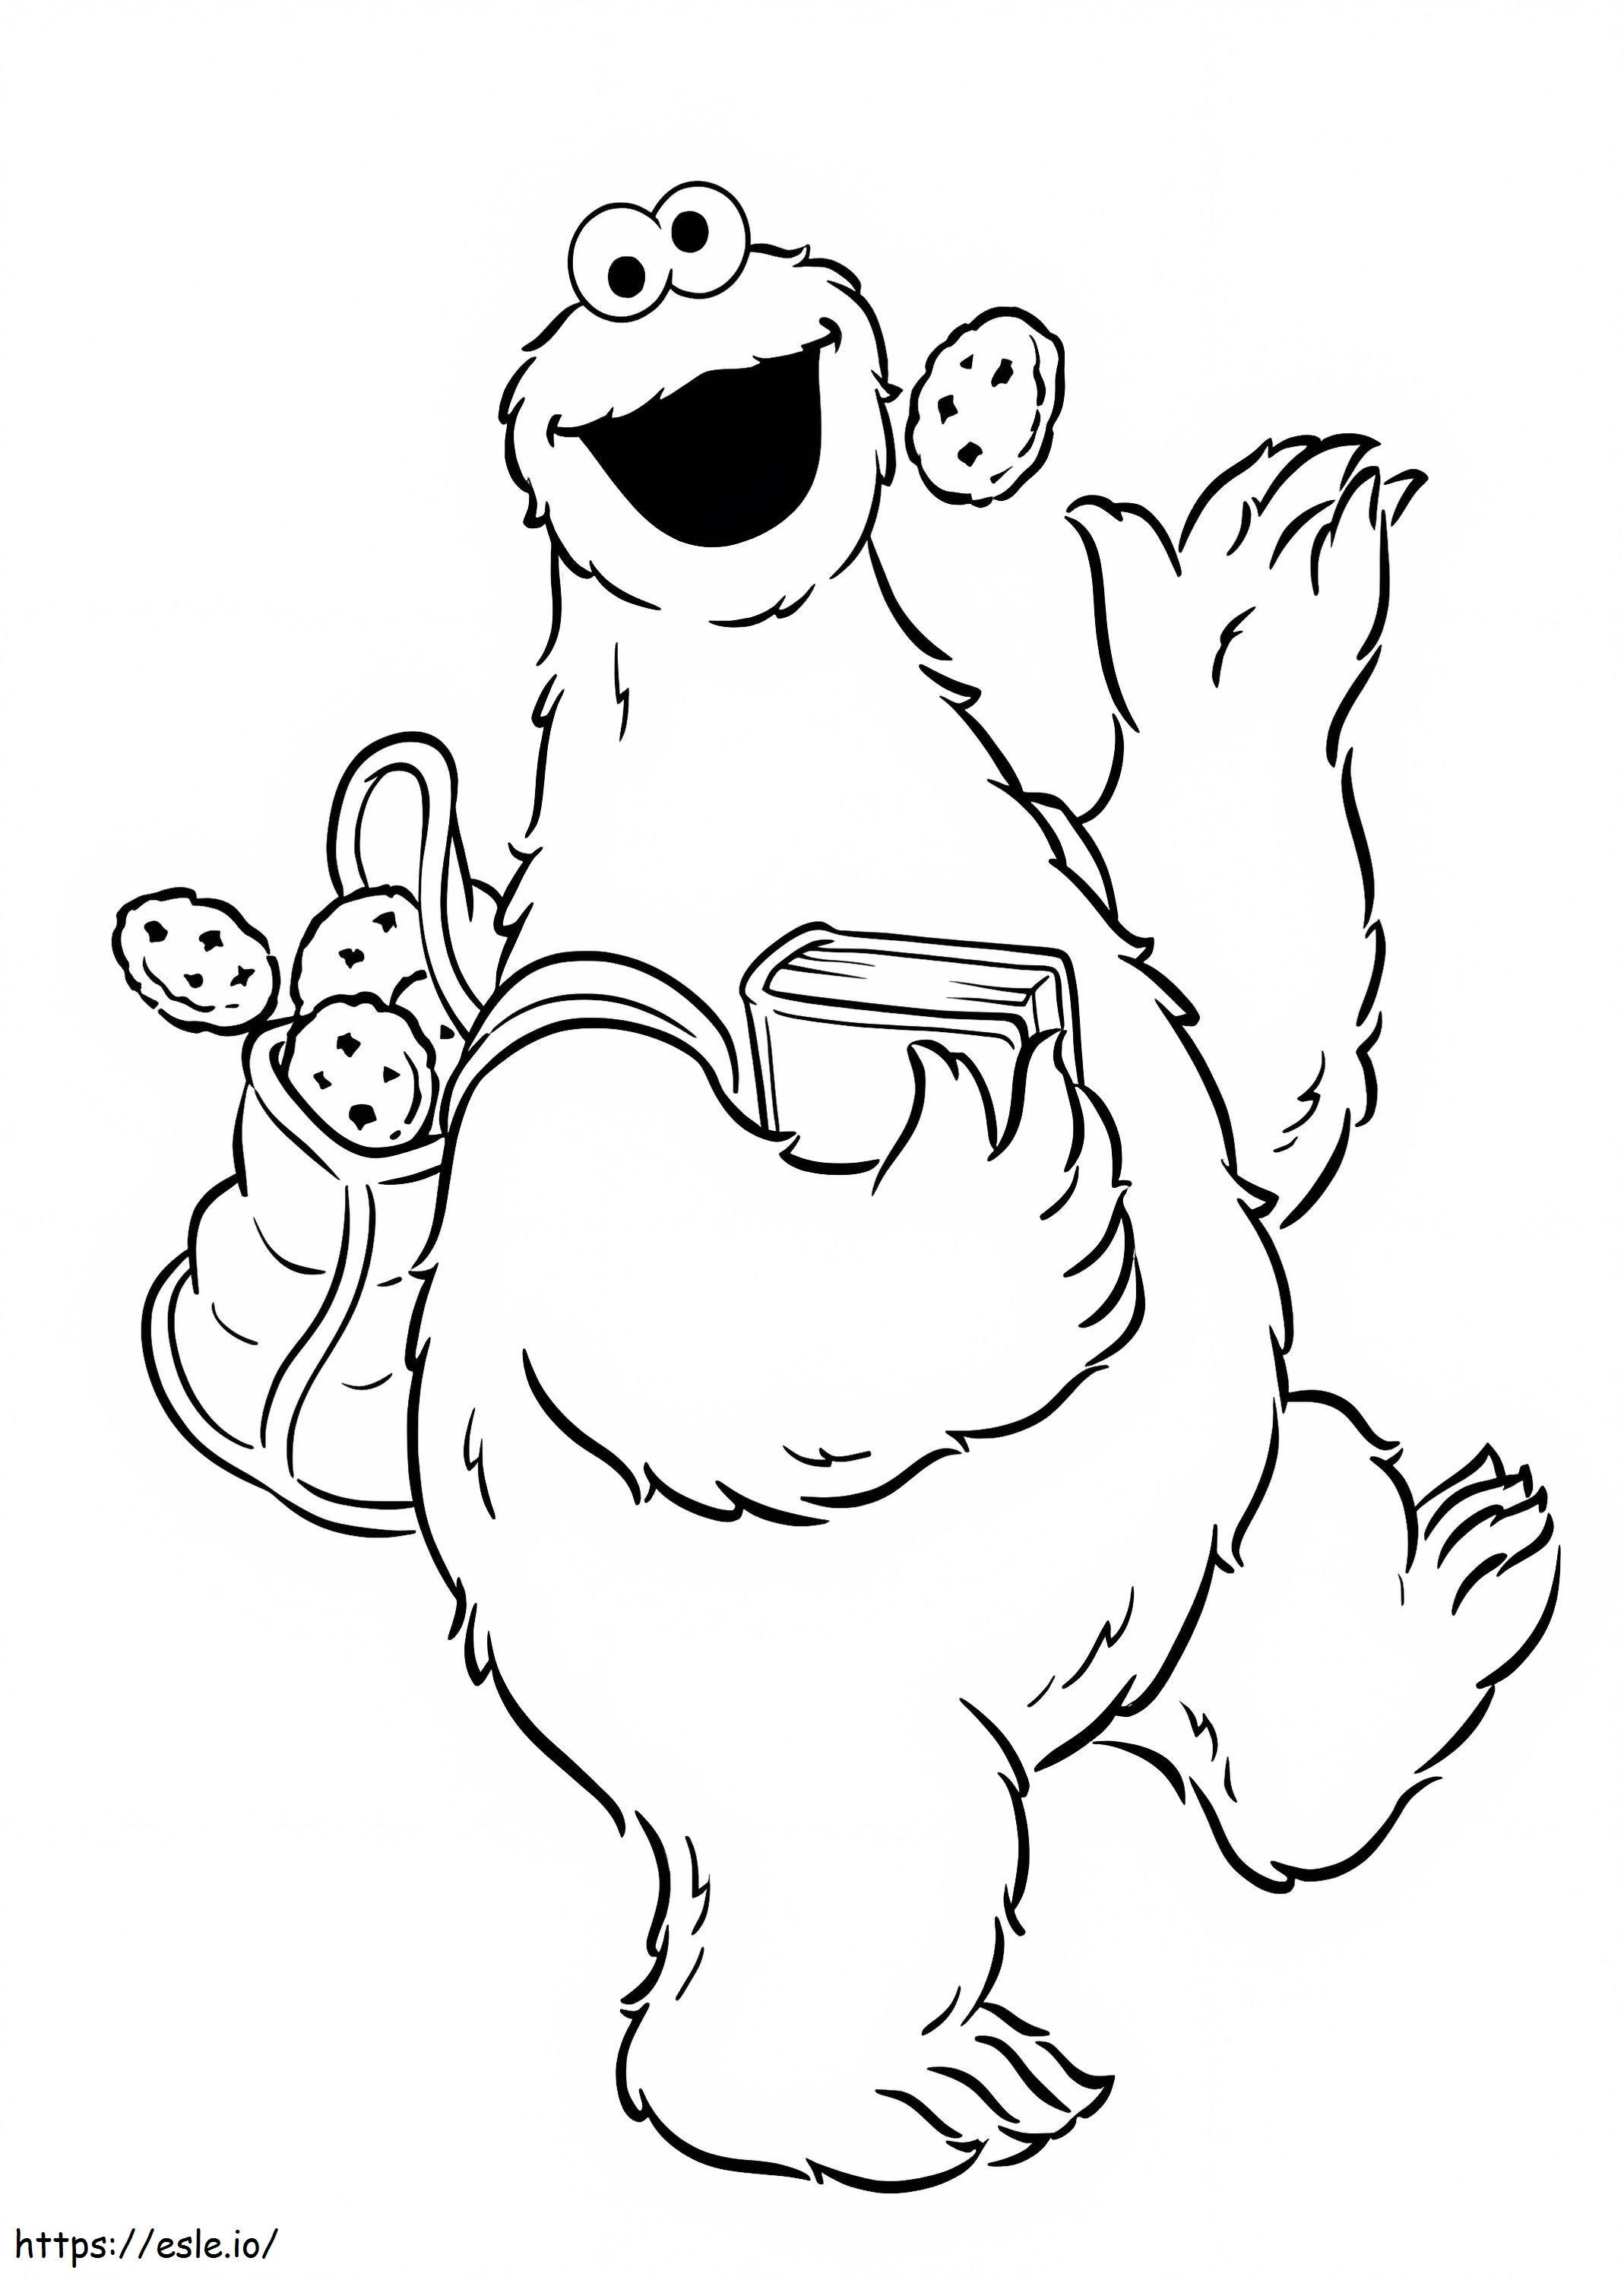 Cookie Monster Eating Cookie coloring page